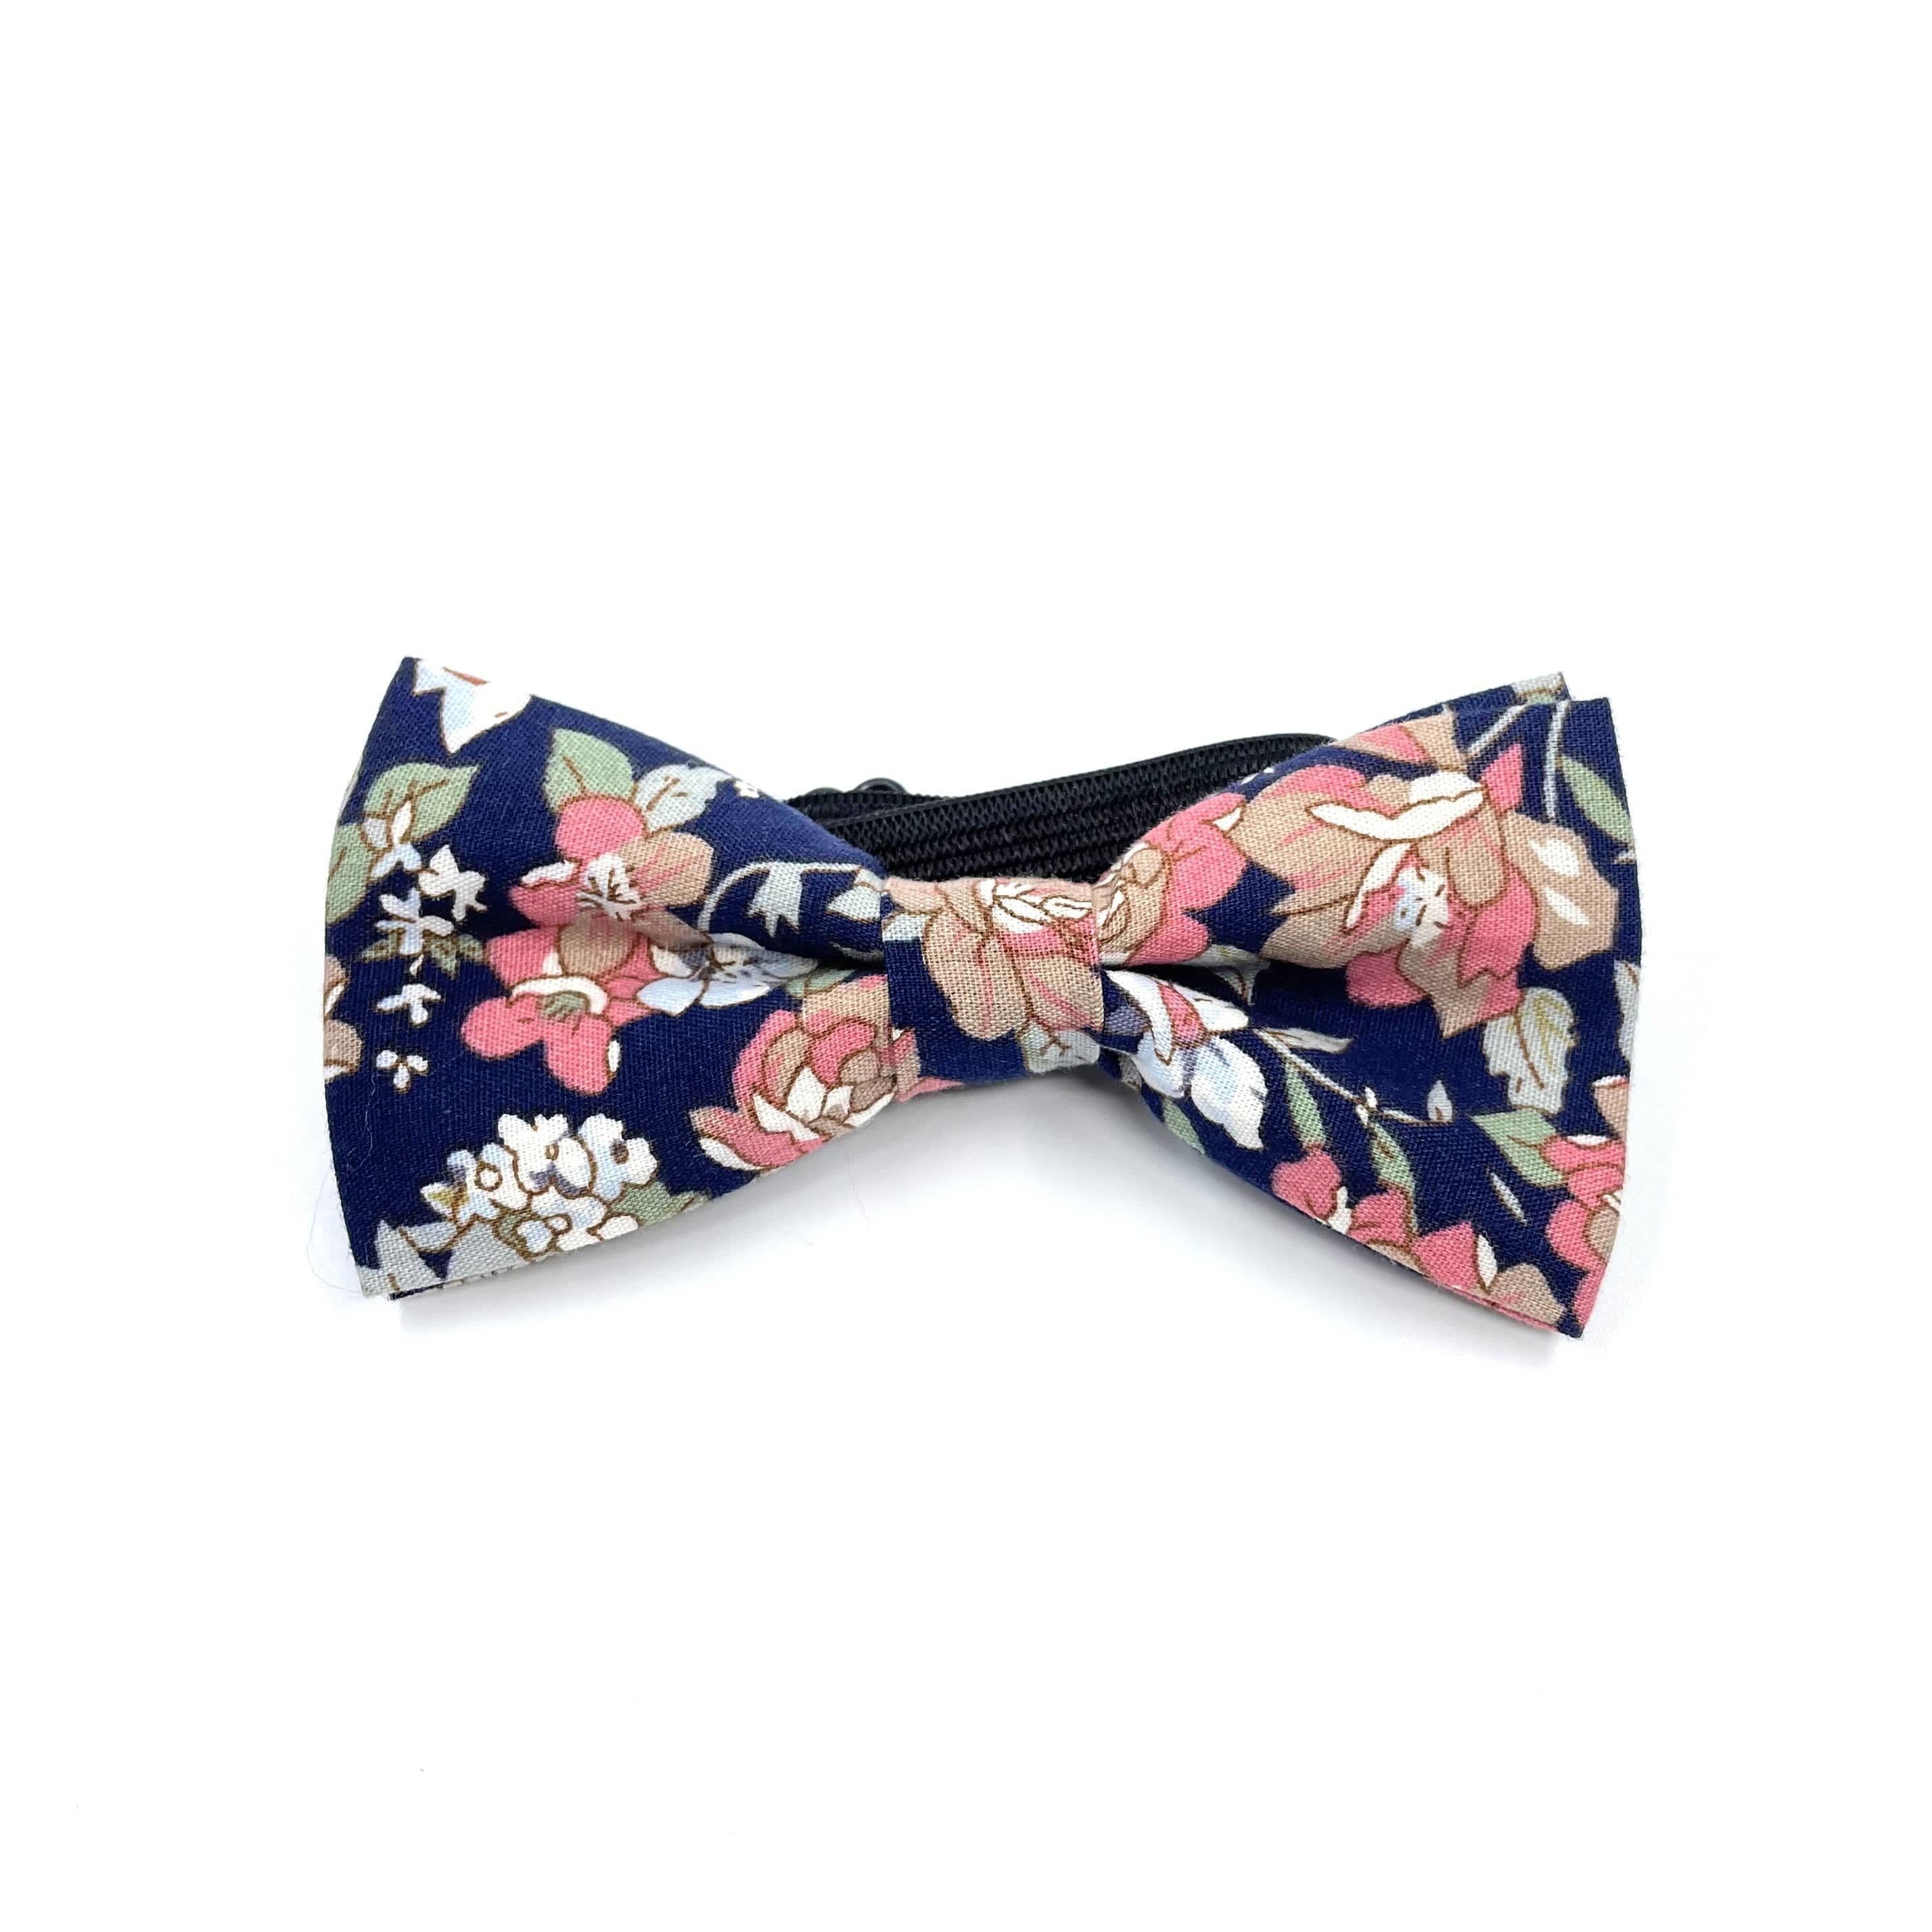 Kids Blue Floral Bow Tie and Children with Pink Flowers ASPEN-Kids Blue Floral Bow Tie - Aspen Floral Kid&#39;s bow tie Strap is adjustablePre-Tied bowtieBow Tie 10.5 * 6CMFor toddlers ages 0- Great for Prom Dinners Interviews Photo shoots Photo sessions Dates Wedding Attendant Ring Bearers Aspen Floral Bow tie . Fits toddlers and babies. Aspen ow tie toddler floral for wedding and events groom groomsmen flower bow tie mytieshop ring bearer page boy bow tie white bow tie white and blue tie kids bowt